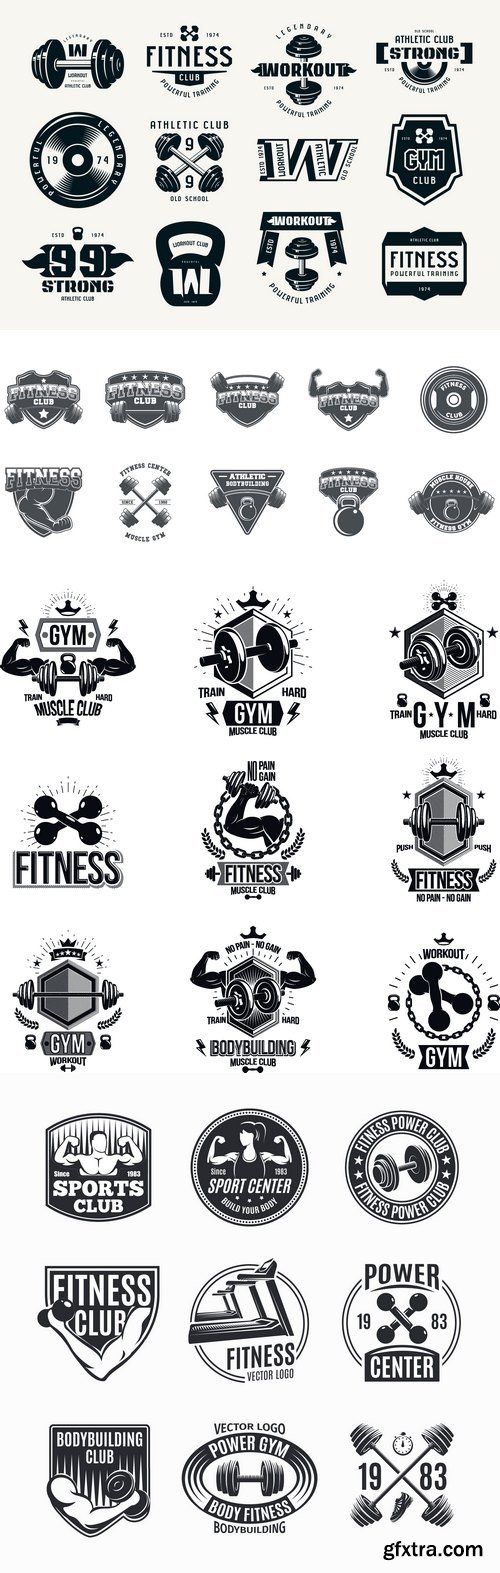 Vectors - Fitness Club and GYM Labels 10